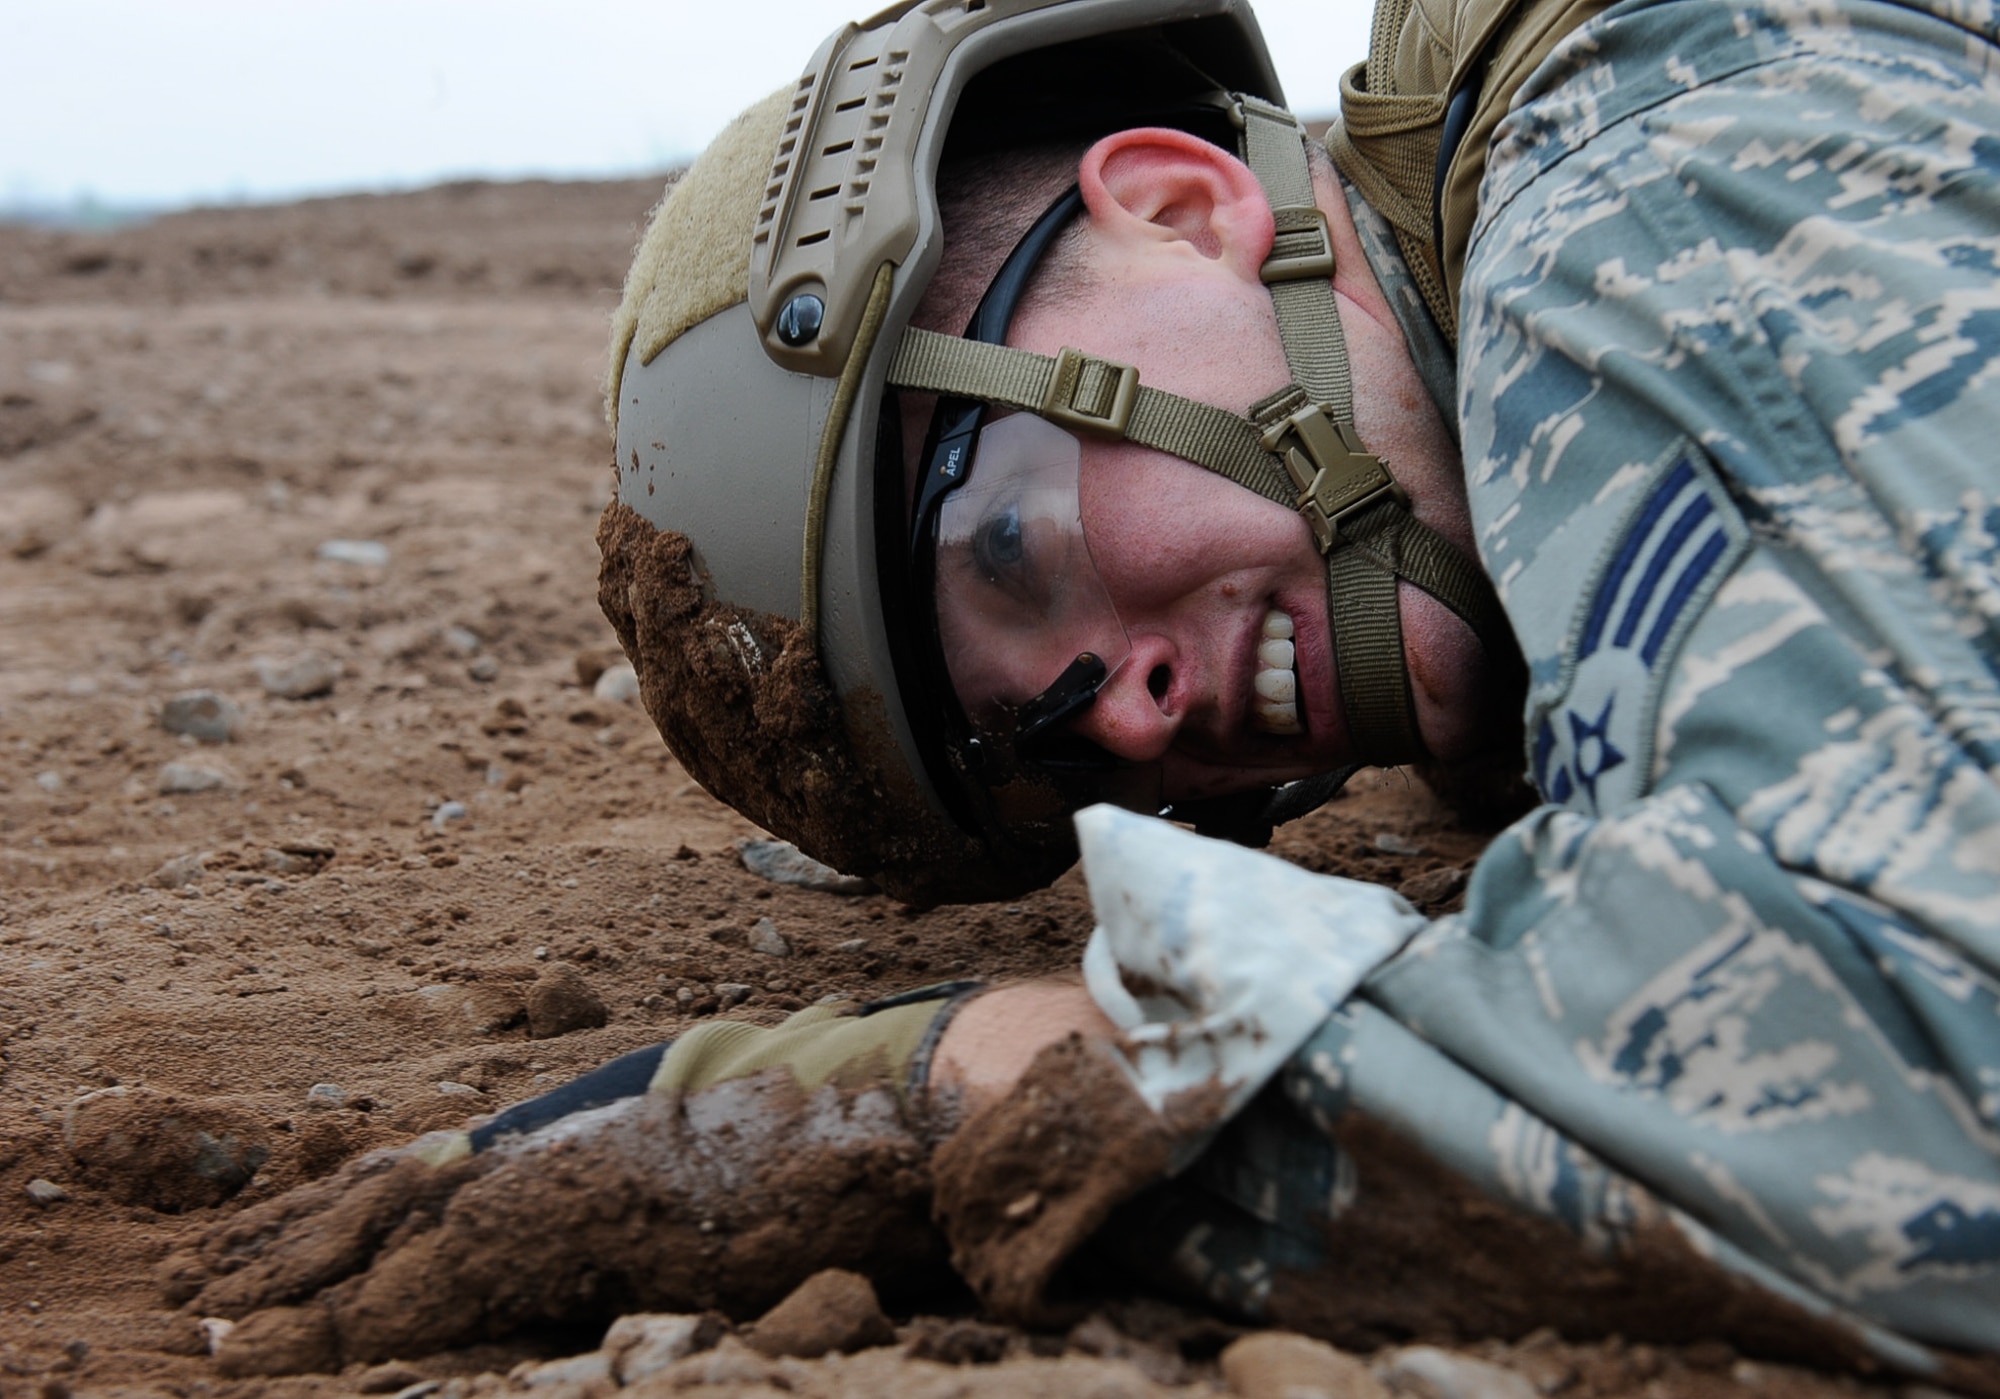 Senior Airman Ryan Daggett, 435th Security Forces Squadron contingency response fire team member, low-crawls while participating in the 435th Contingency Response Group Olympics on Ramstein Air Base, Germany, May 5, 2017. The 435th CRG Airmen provide expeditionary airfield ops, combat support and training, flyaway security training, construction, and mobile aircraft arresting system (MAAS) support, enabling rapid stand-up of combat operations anywhere in the U.S. European Command area of responsibility. (U.S. Air Force photo by Airman 1st Class Savannah L. Waters)